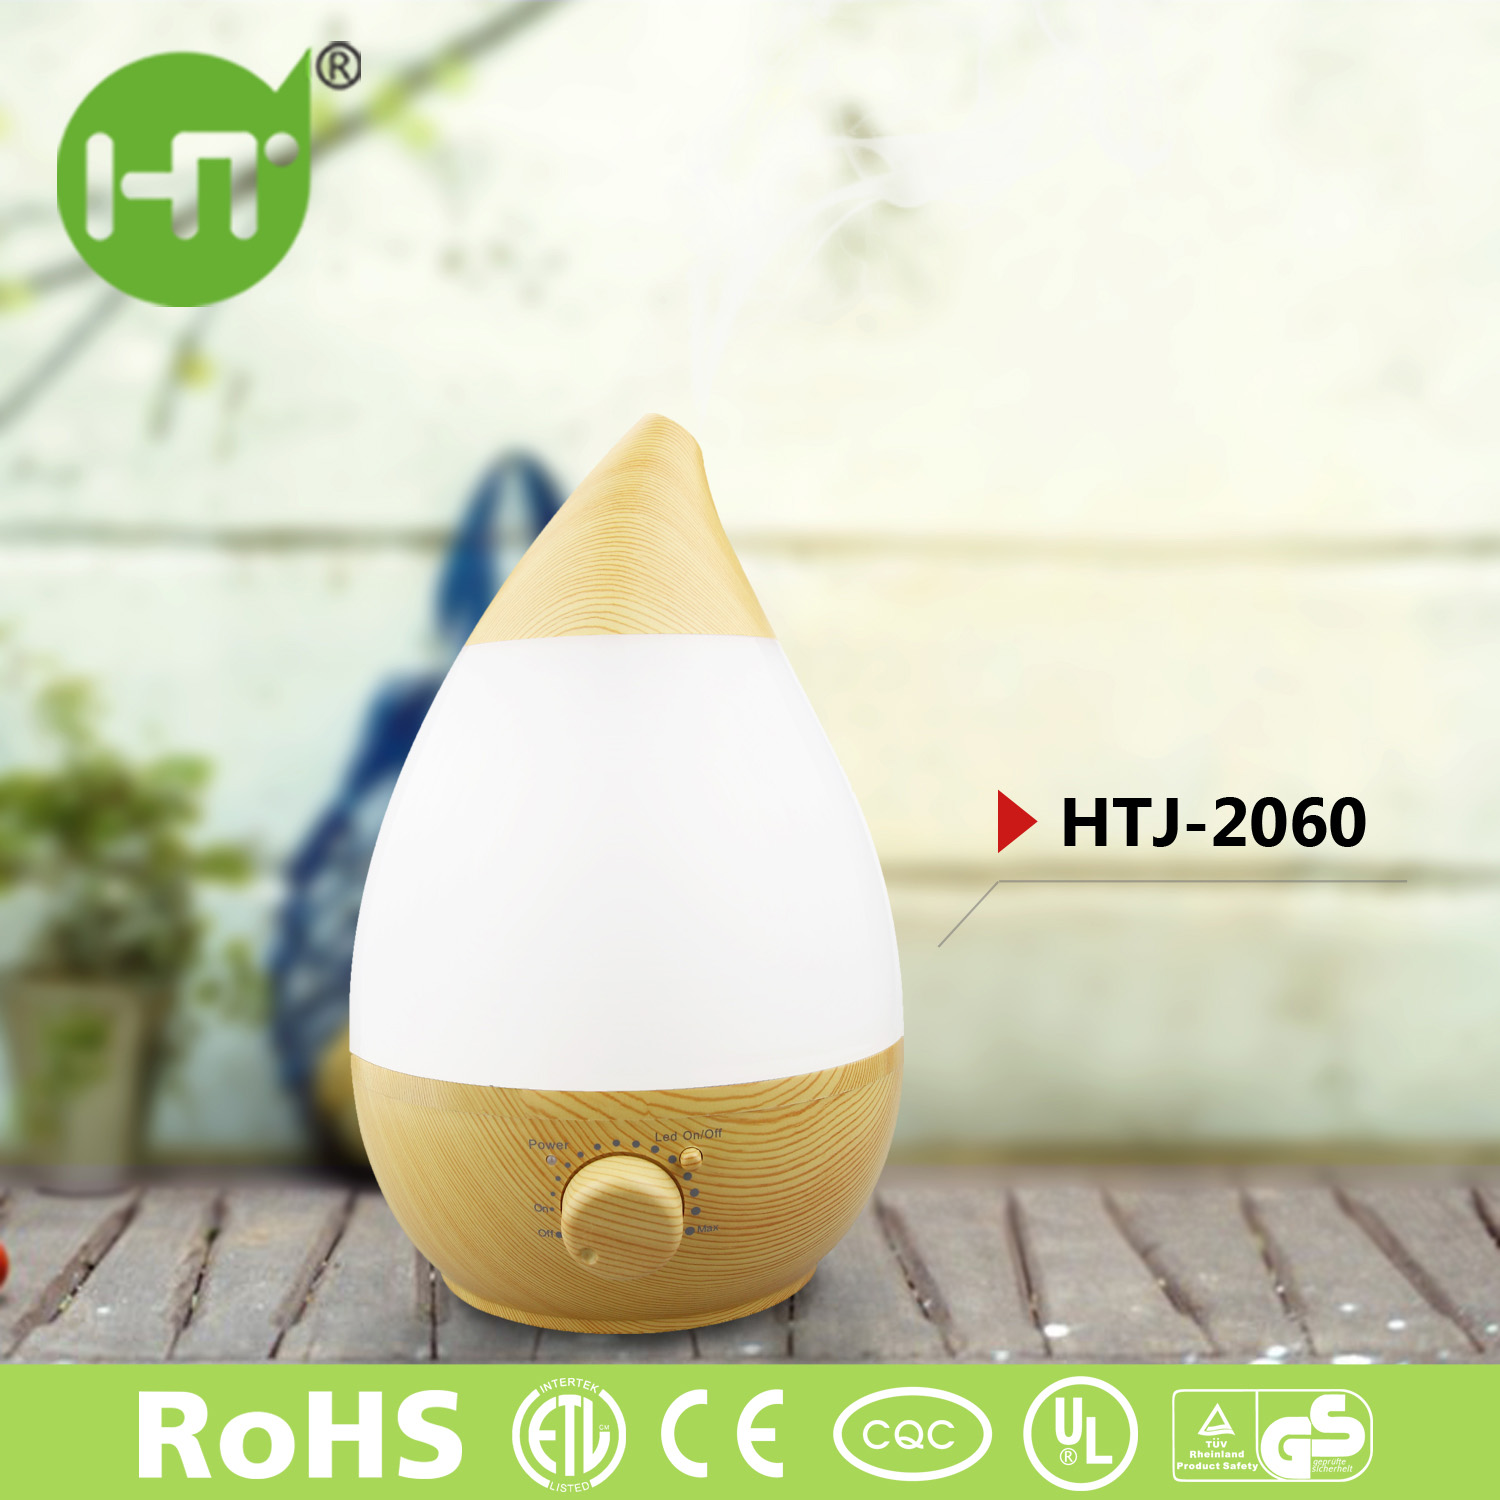 HTJ-2060 3.8L Wood Grain Air Cooler Humidifier Aroma Essential Oil Available Ultrasonic Humidifier